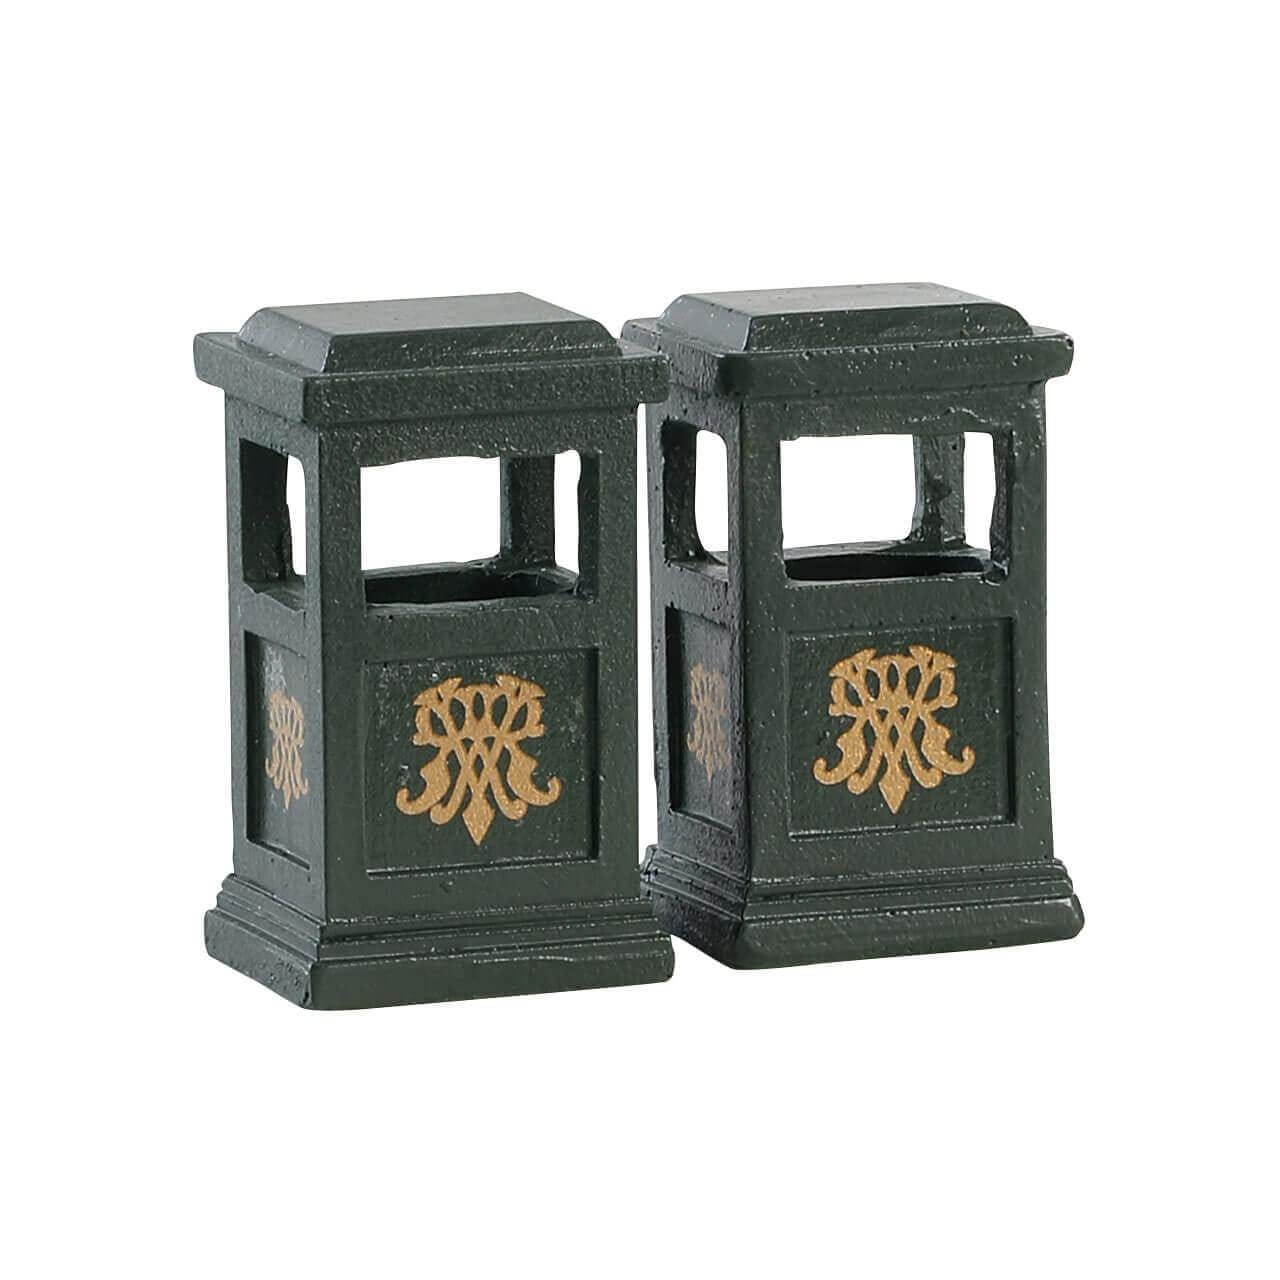 Lemax Accessory Lemax Accessory Green Trash Can, Set of 2 *Pre-Order*